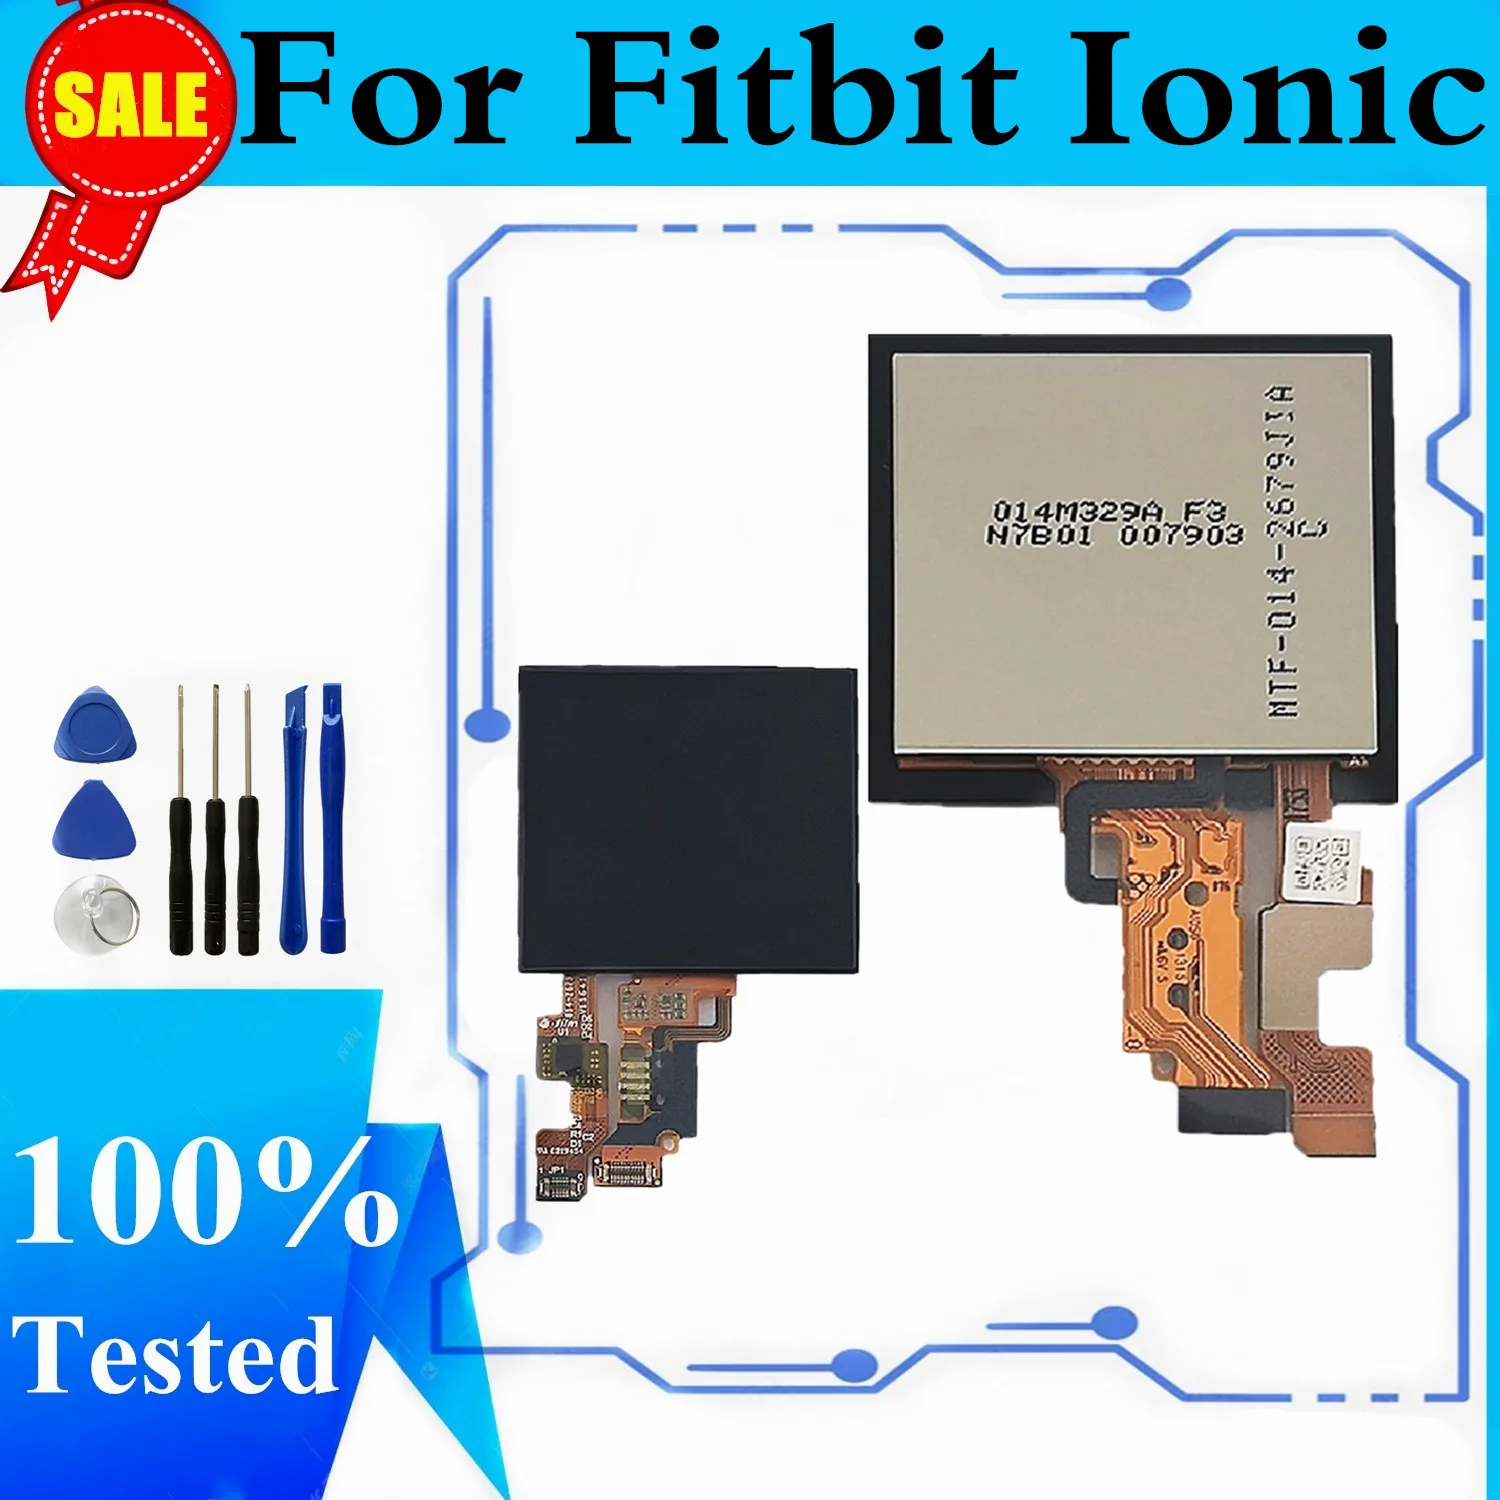 

Original LCD For Fitbit Ionic Watch LCD Display Touch Screen Digitizer For Fitbit Ionic Smart Watch Display Replacement